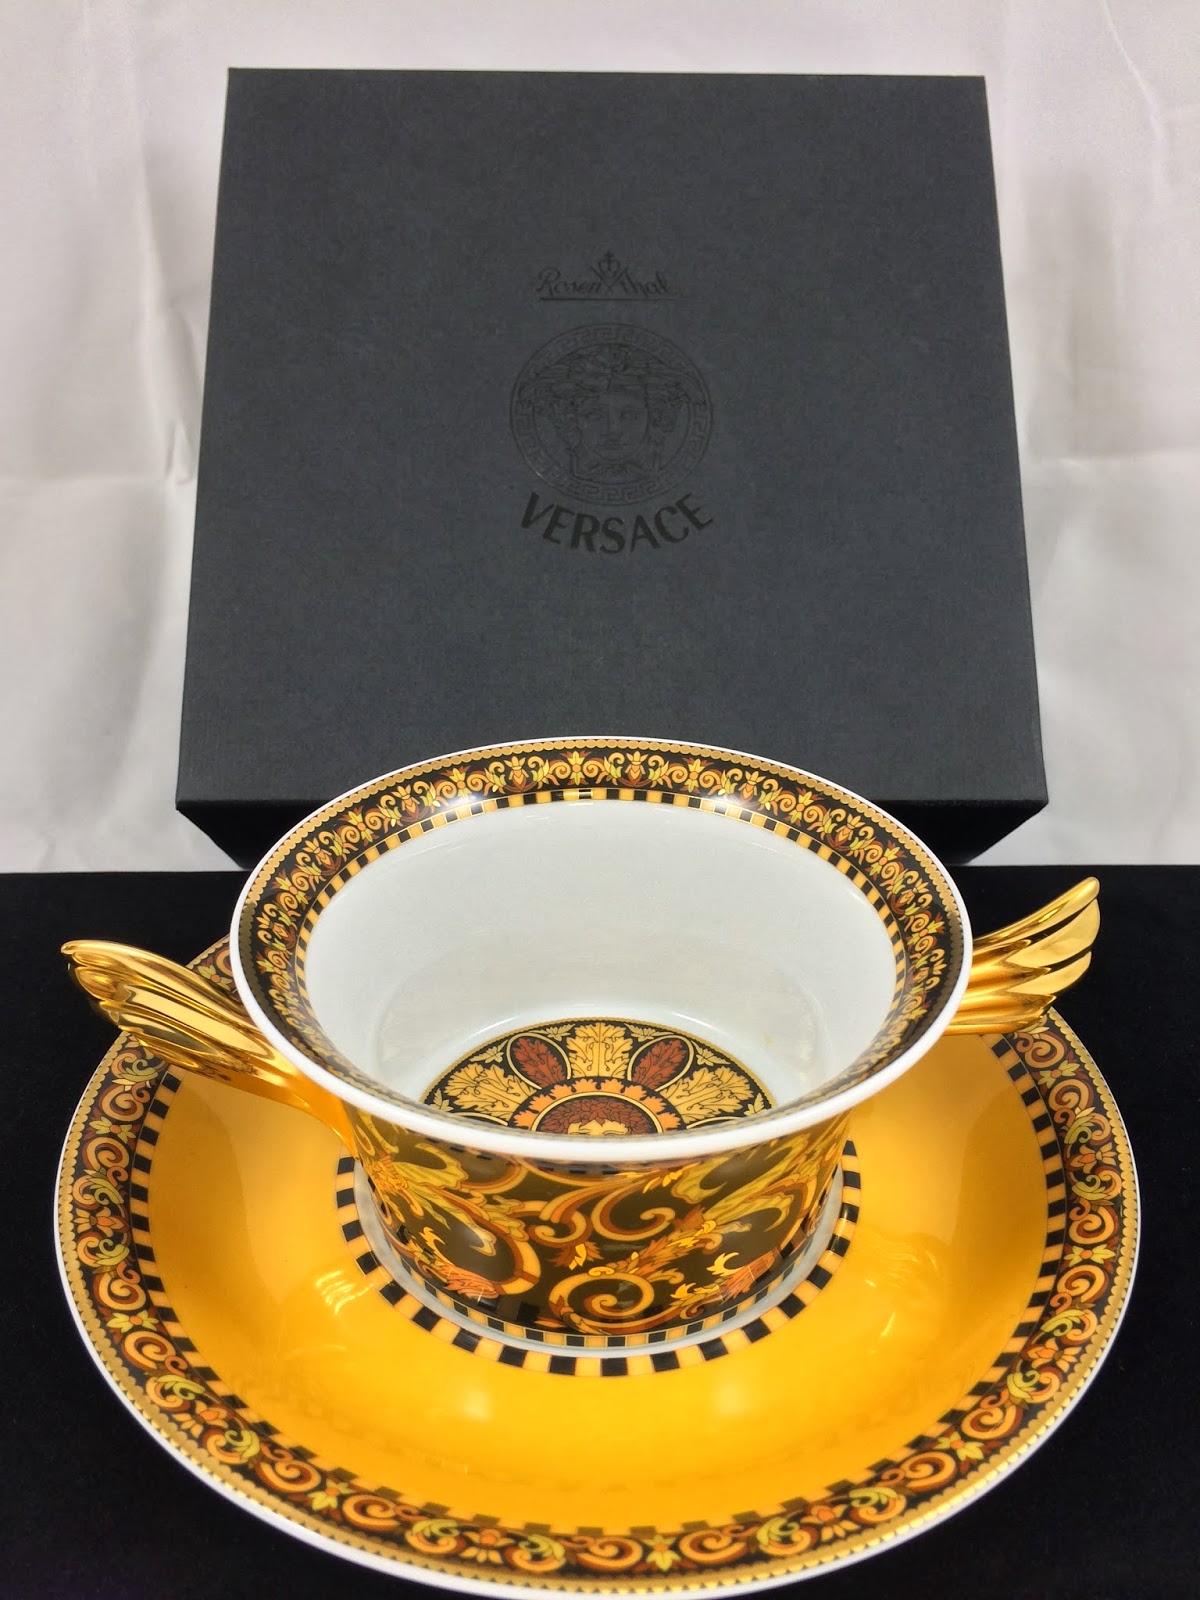 Antiques, Art, and Collectibles: Versace Barocco Rosenthal China